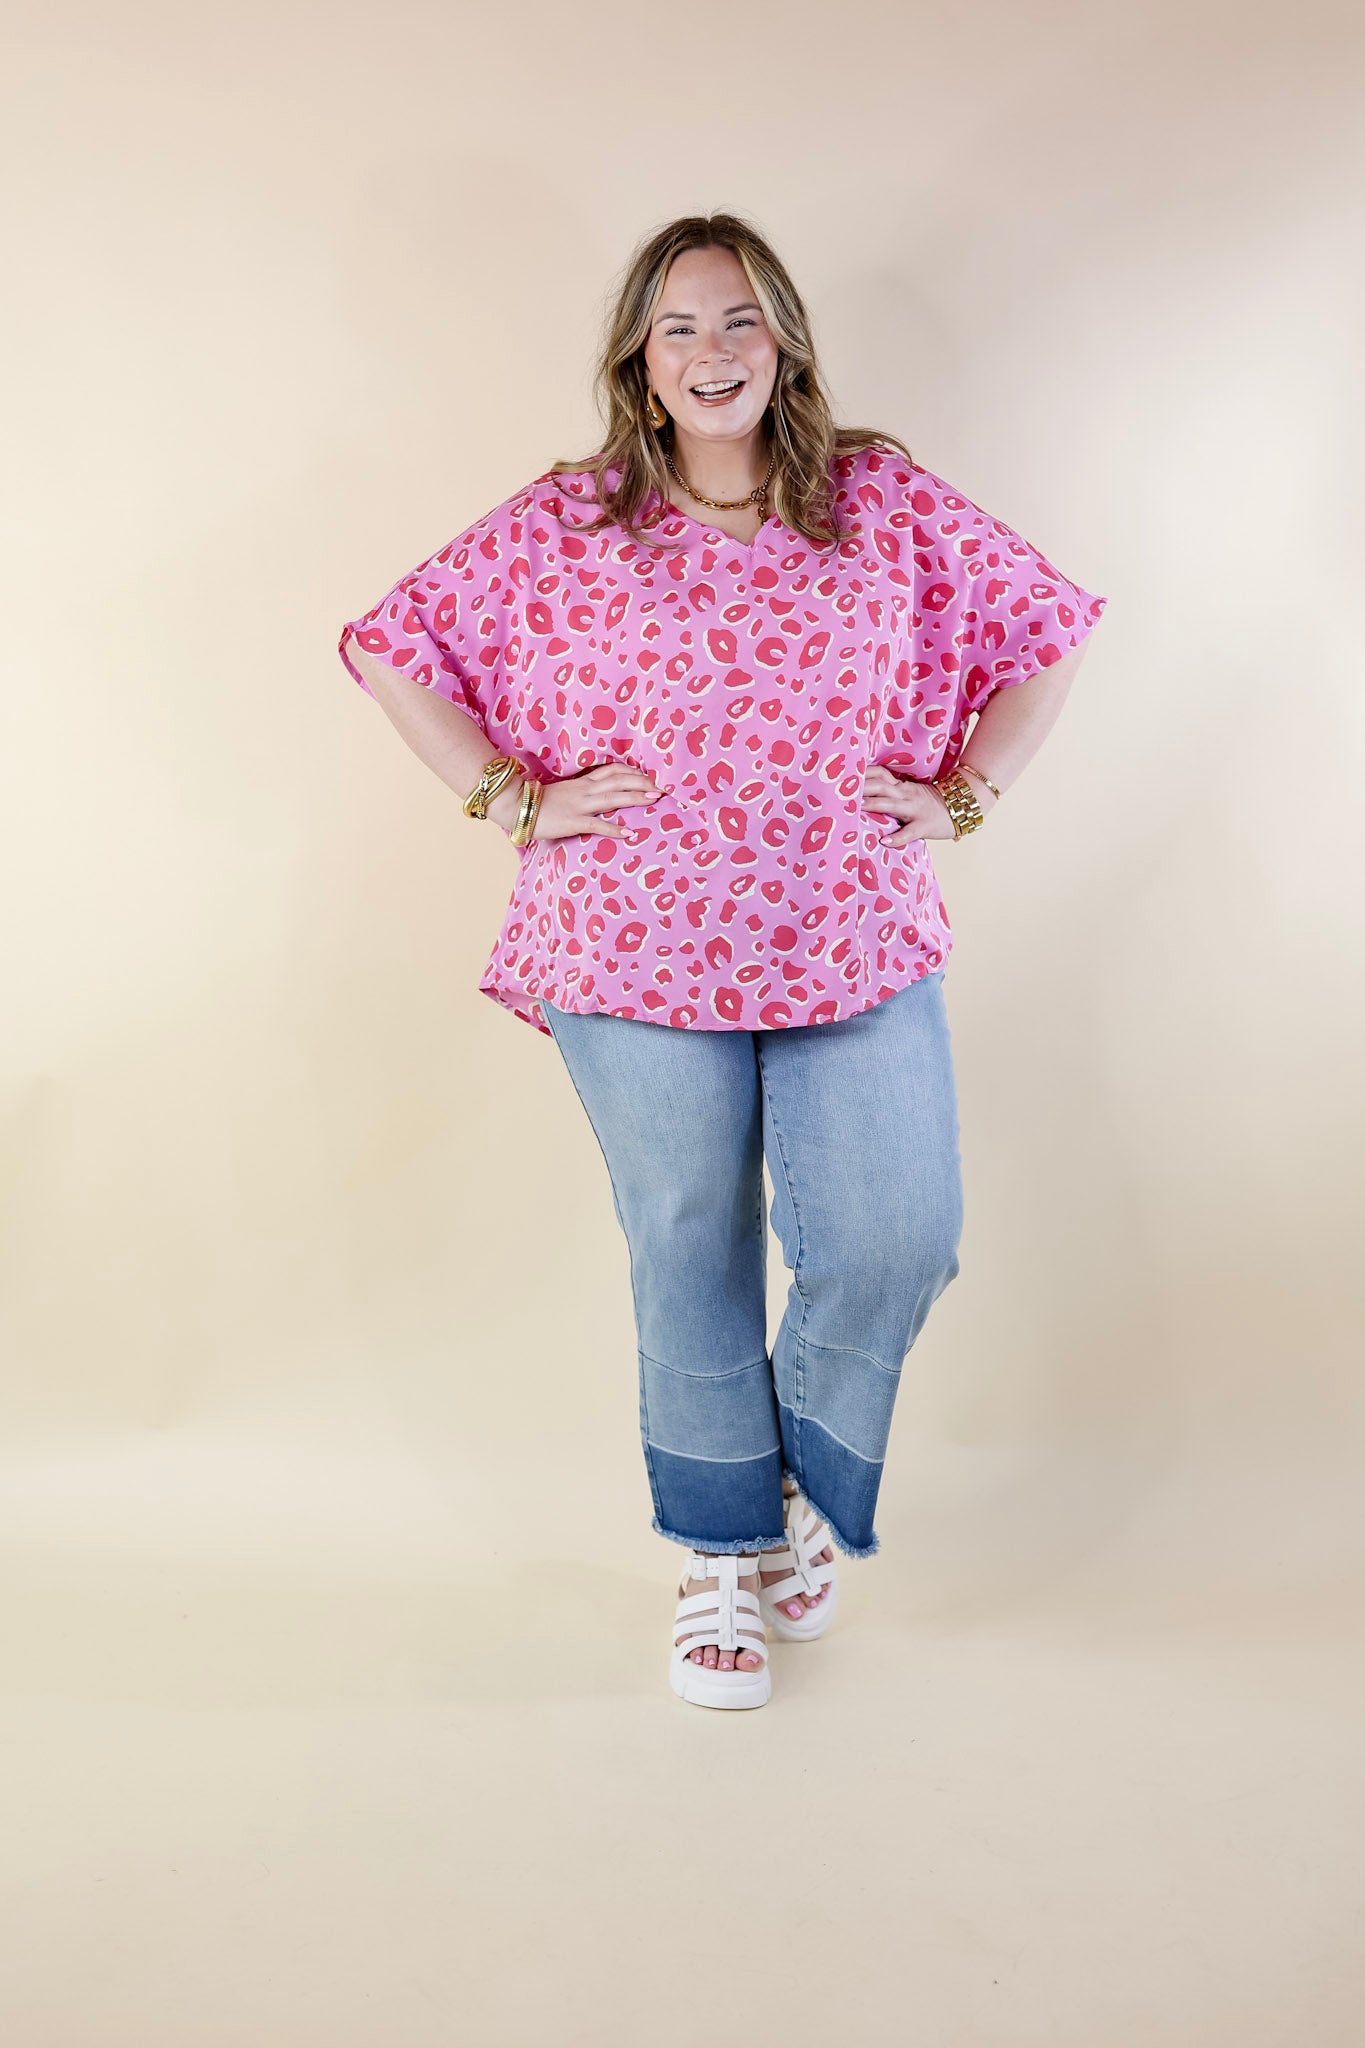 Majestic Moment V Neck Leopard Print Poncho Top in Pink - Giddy Up Glamour Boutique